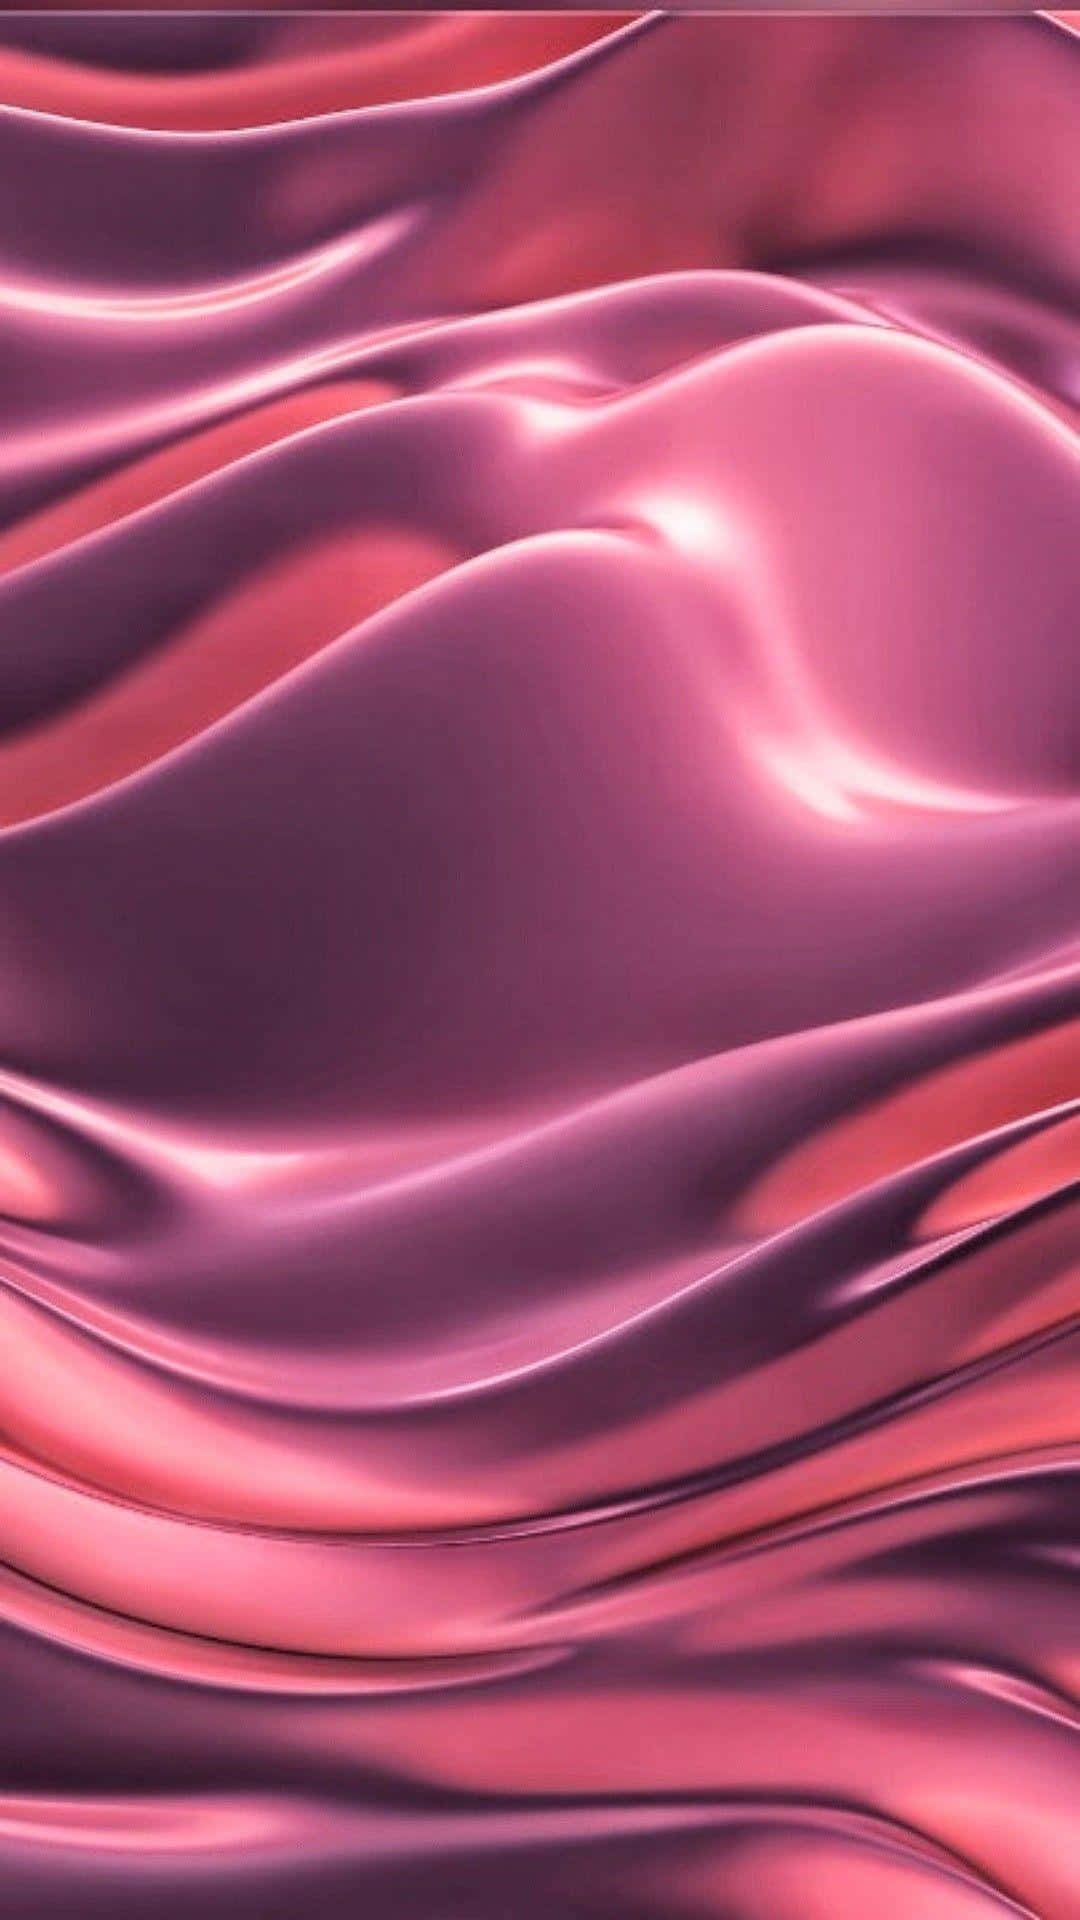 Pink Silk Background With Wavy Lines Wallpaper